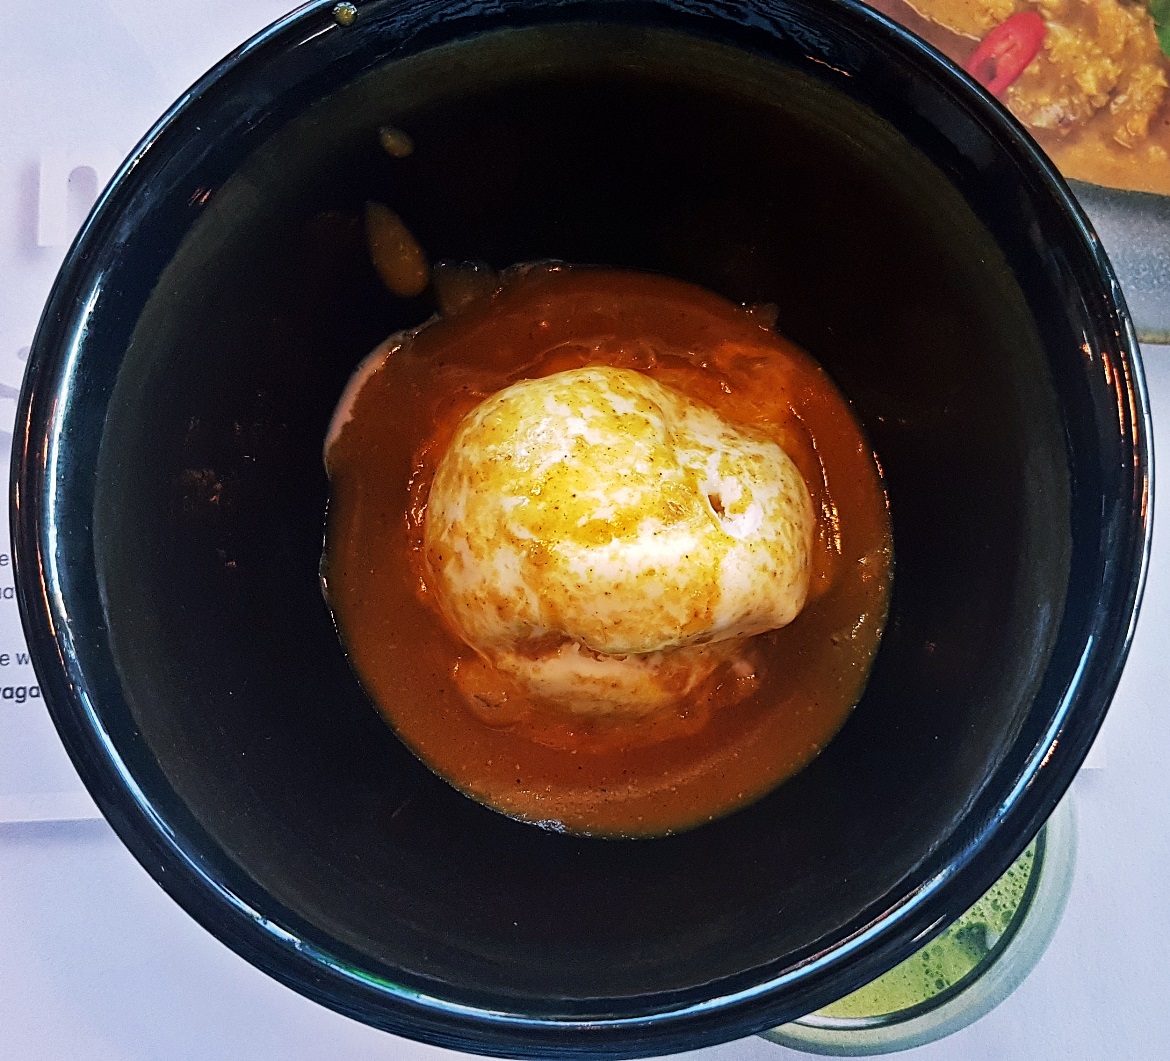 Katsu Curry Ice Cream - Wagamama Menu Pairing, Review by BeckyBecky Blogs